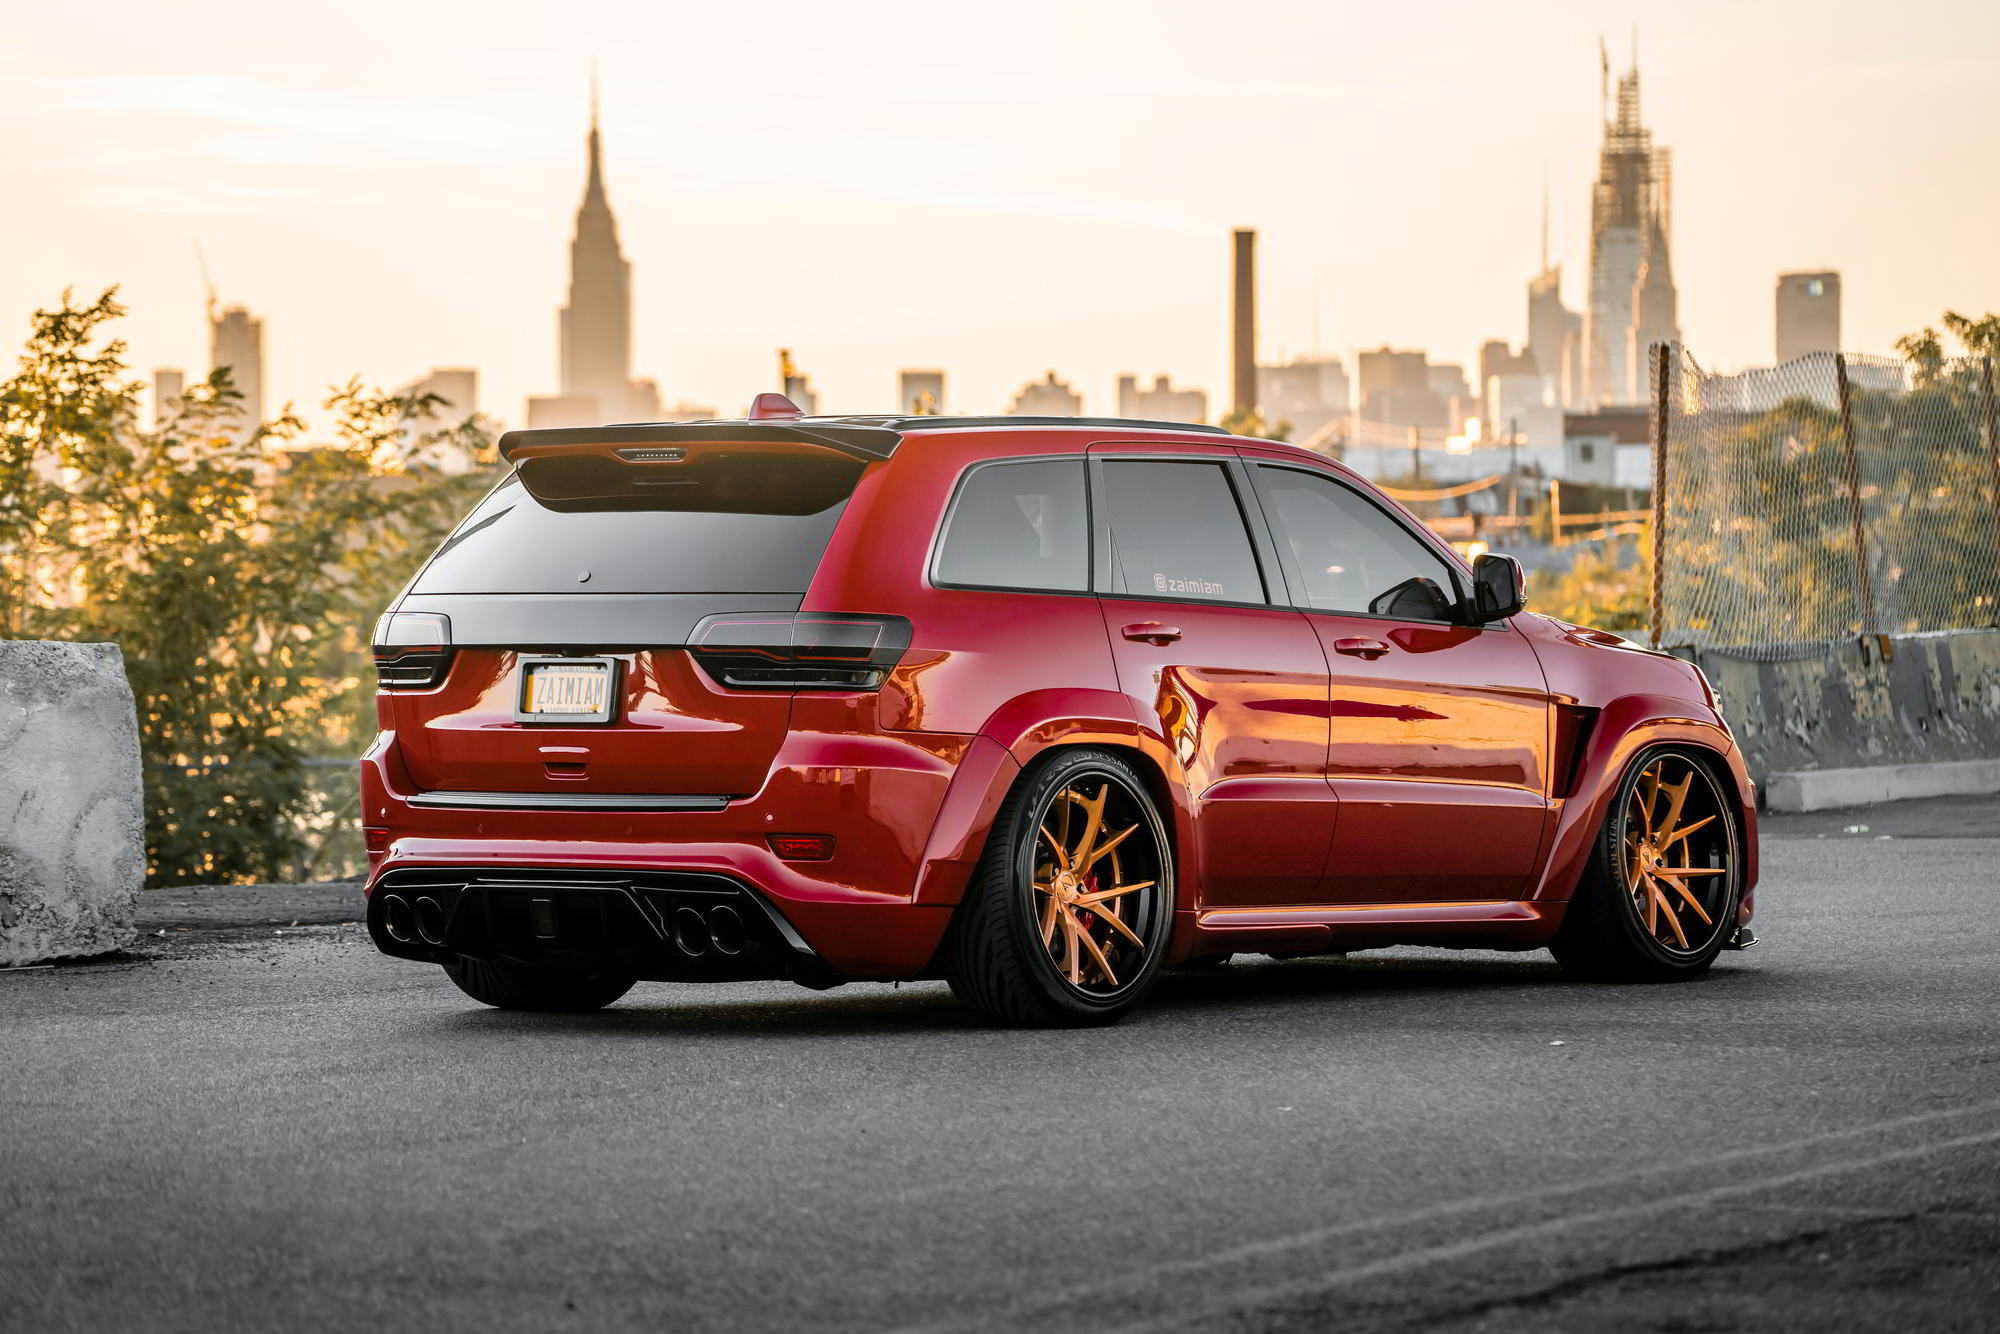 Check our price and buy a Renegade Design body kit for Jeep Grand Cherokee Trackhawk Tyrannos V3